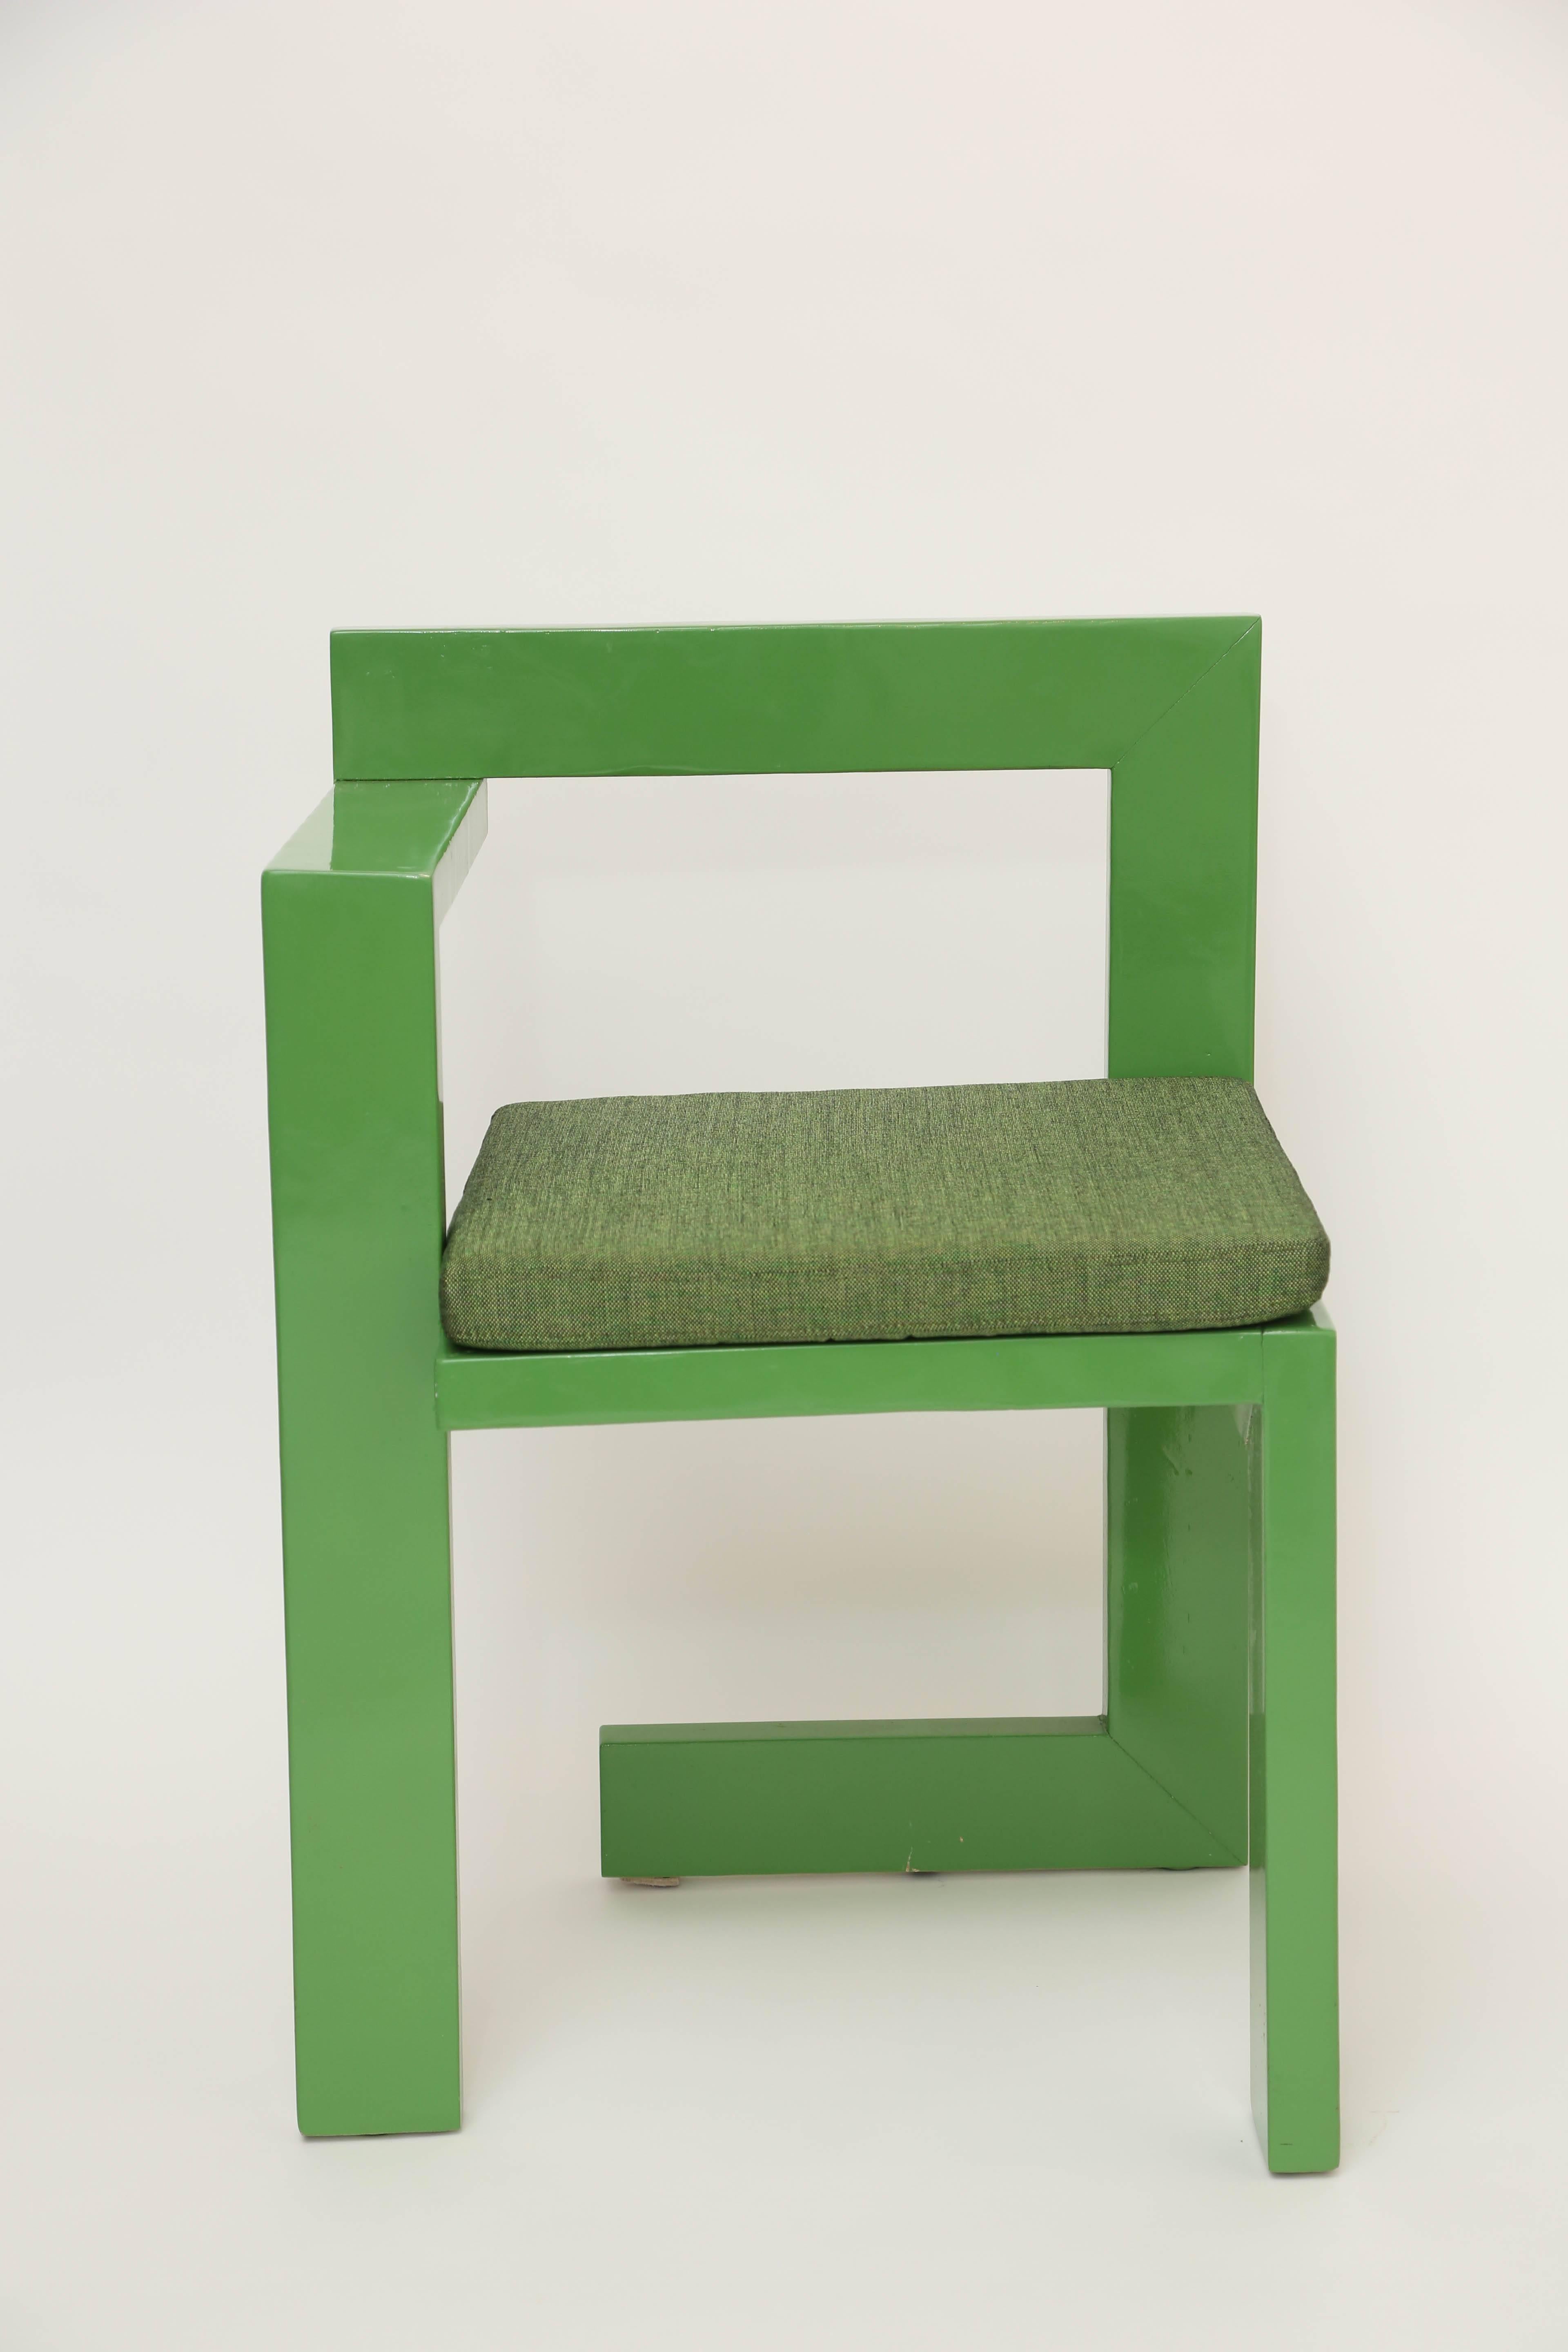 Green lacquer wood chair with loose seat cushion.